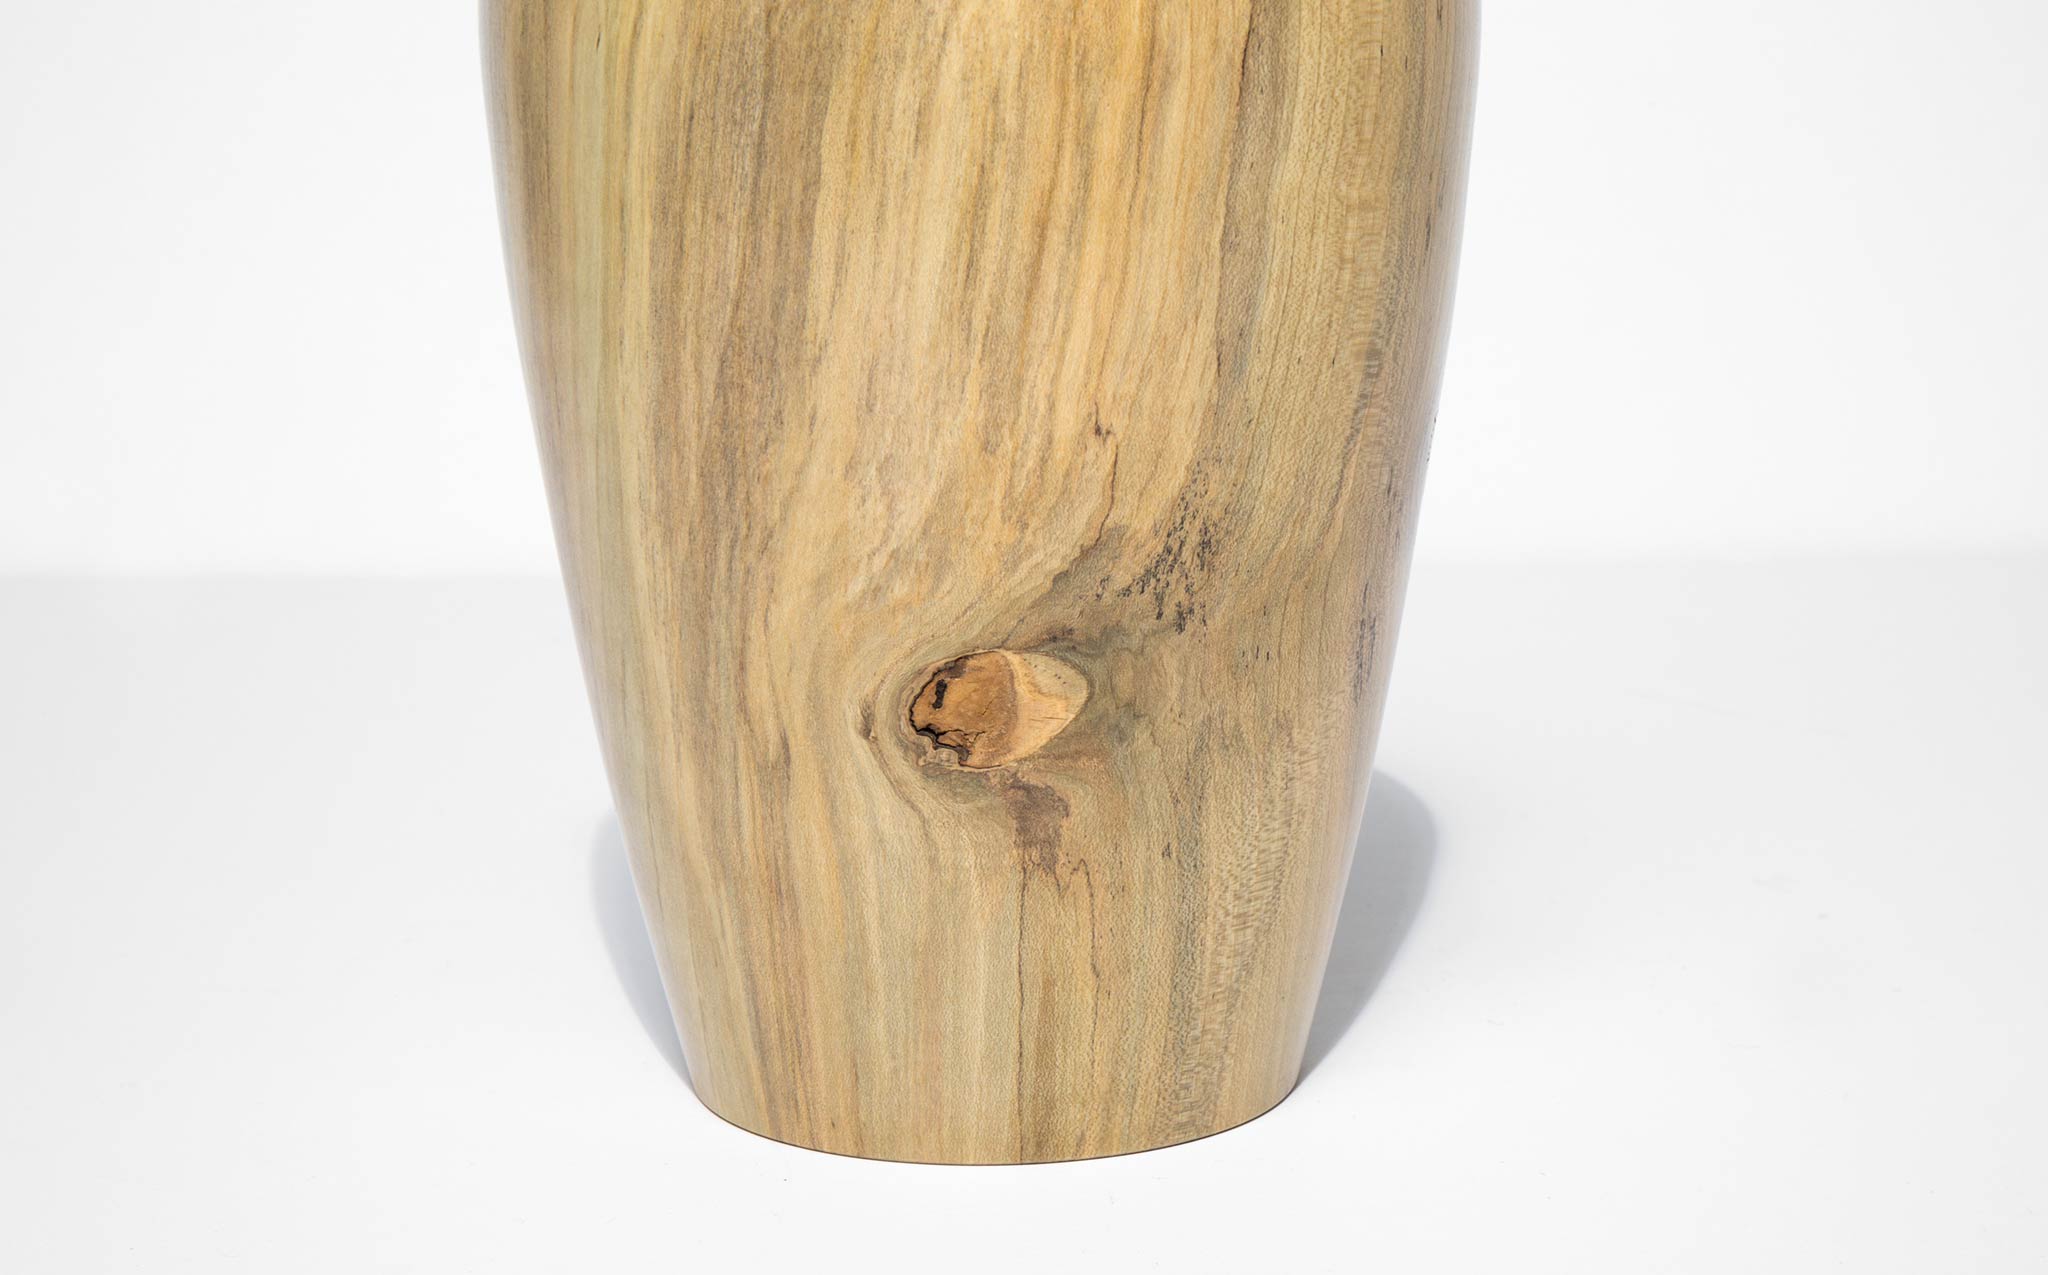 Bruce Perlmutter Hand Lathed Holly Vessel